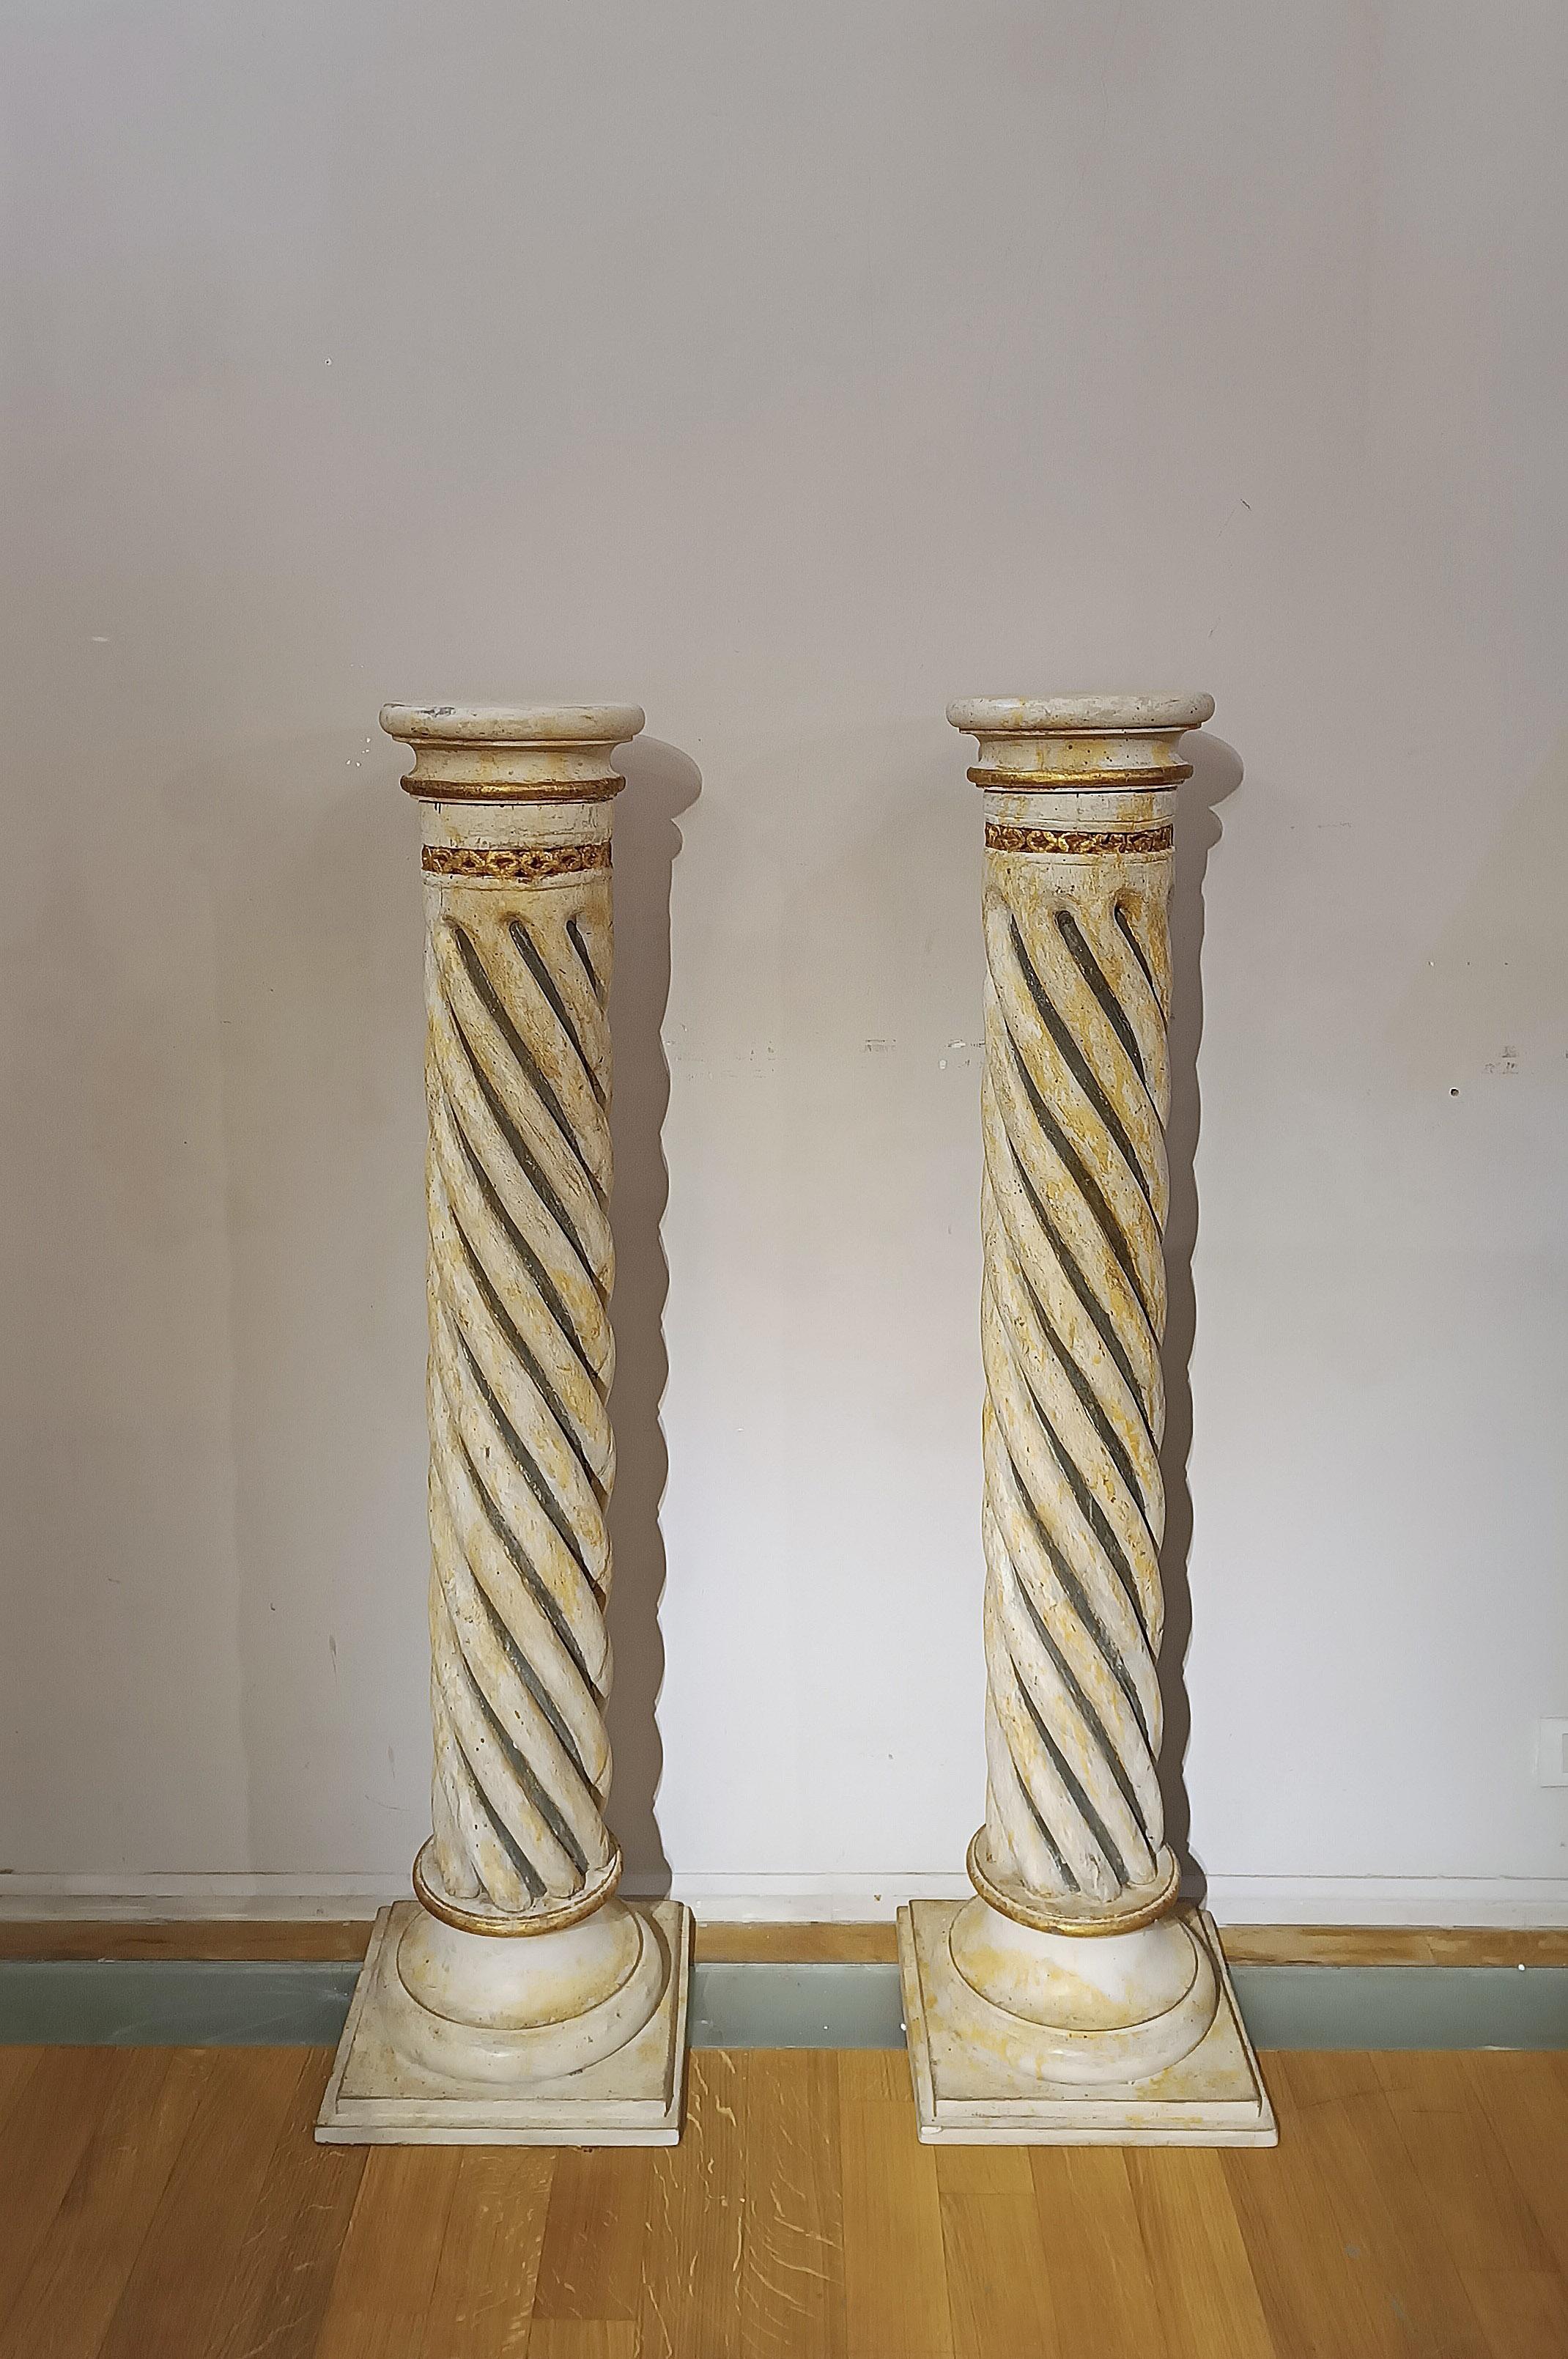 Pair of wooden twisted columns, finely carved and painted with a black and yellow duotone. The columns are enriched with pure gold leaf gilding, with particular attention to details such as the final bull and the upper part decorated with geometric